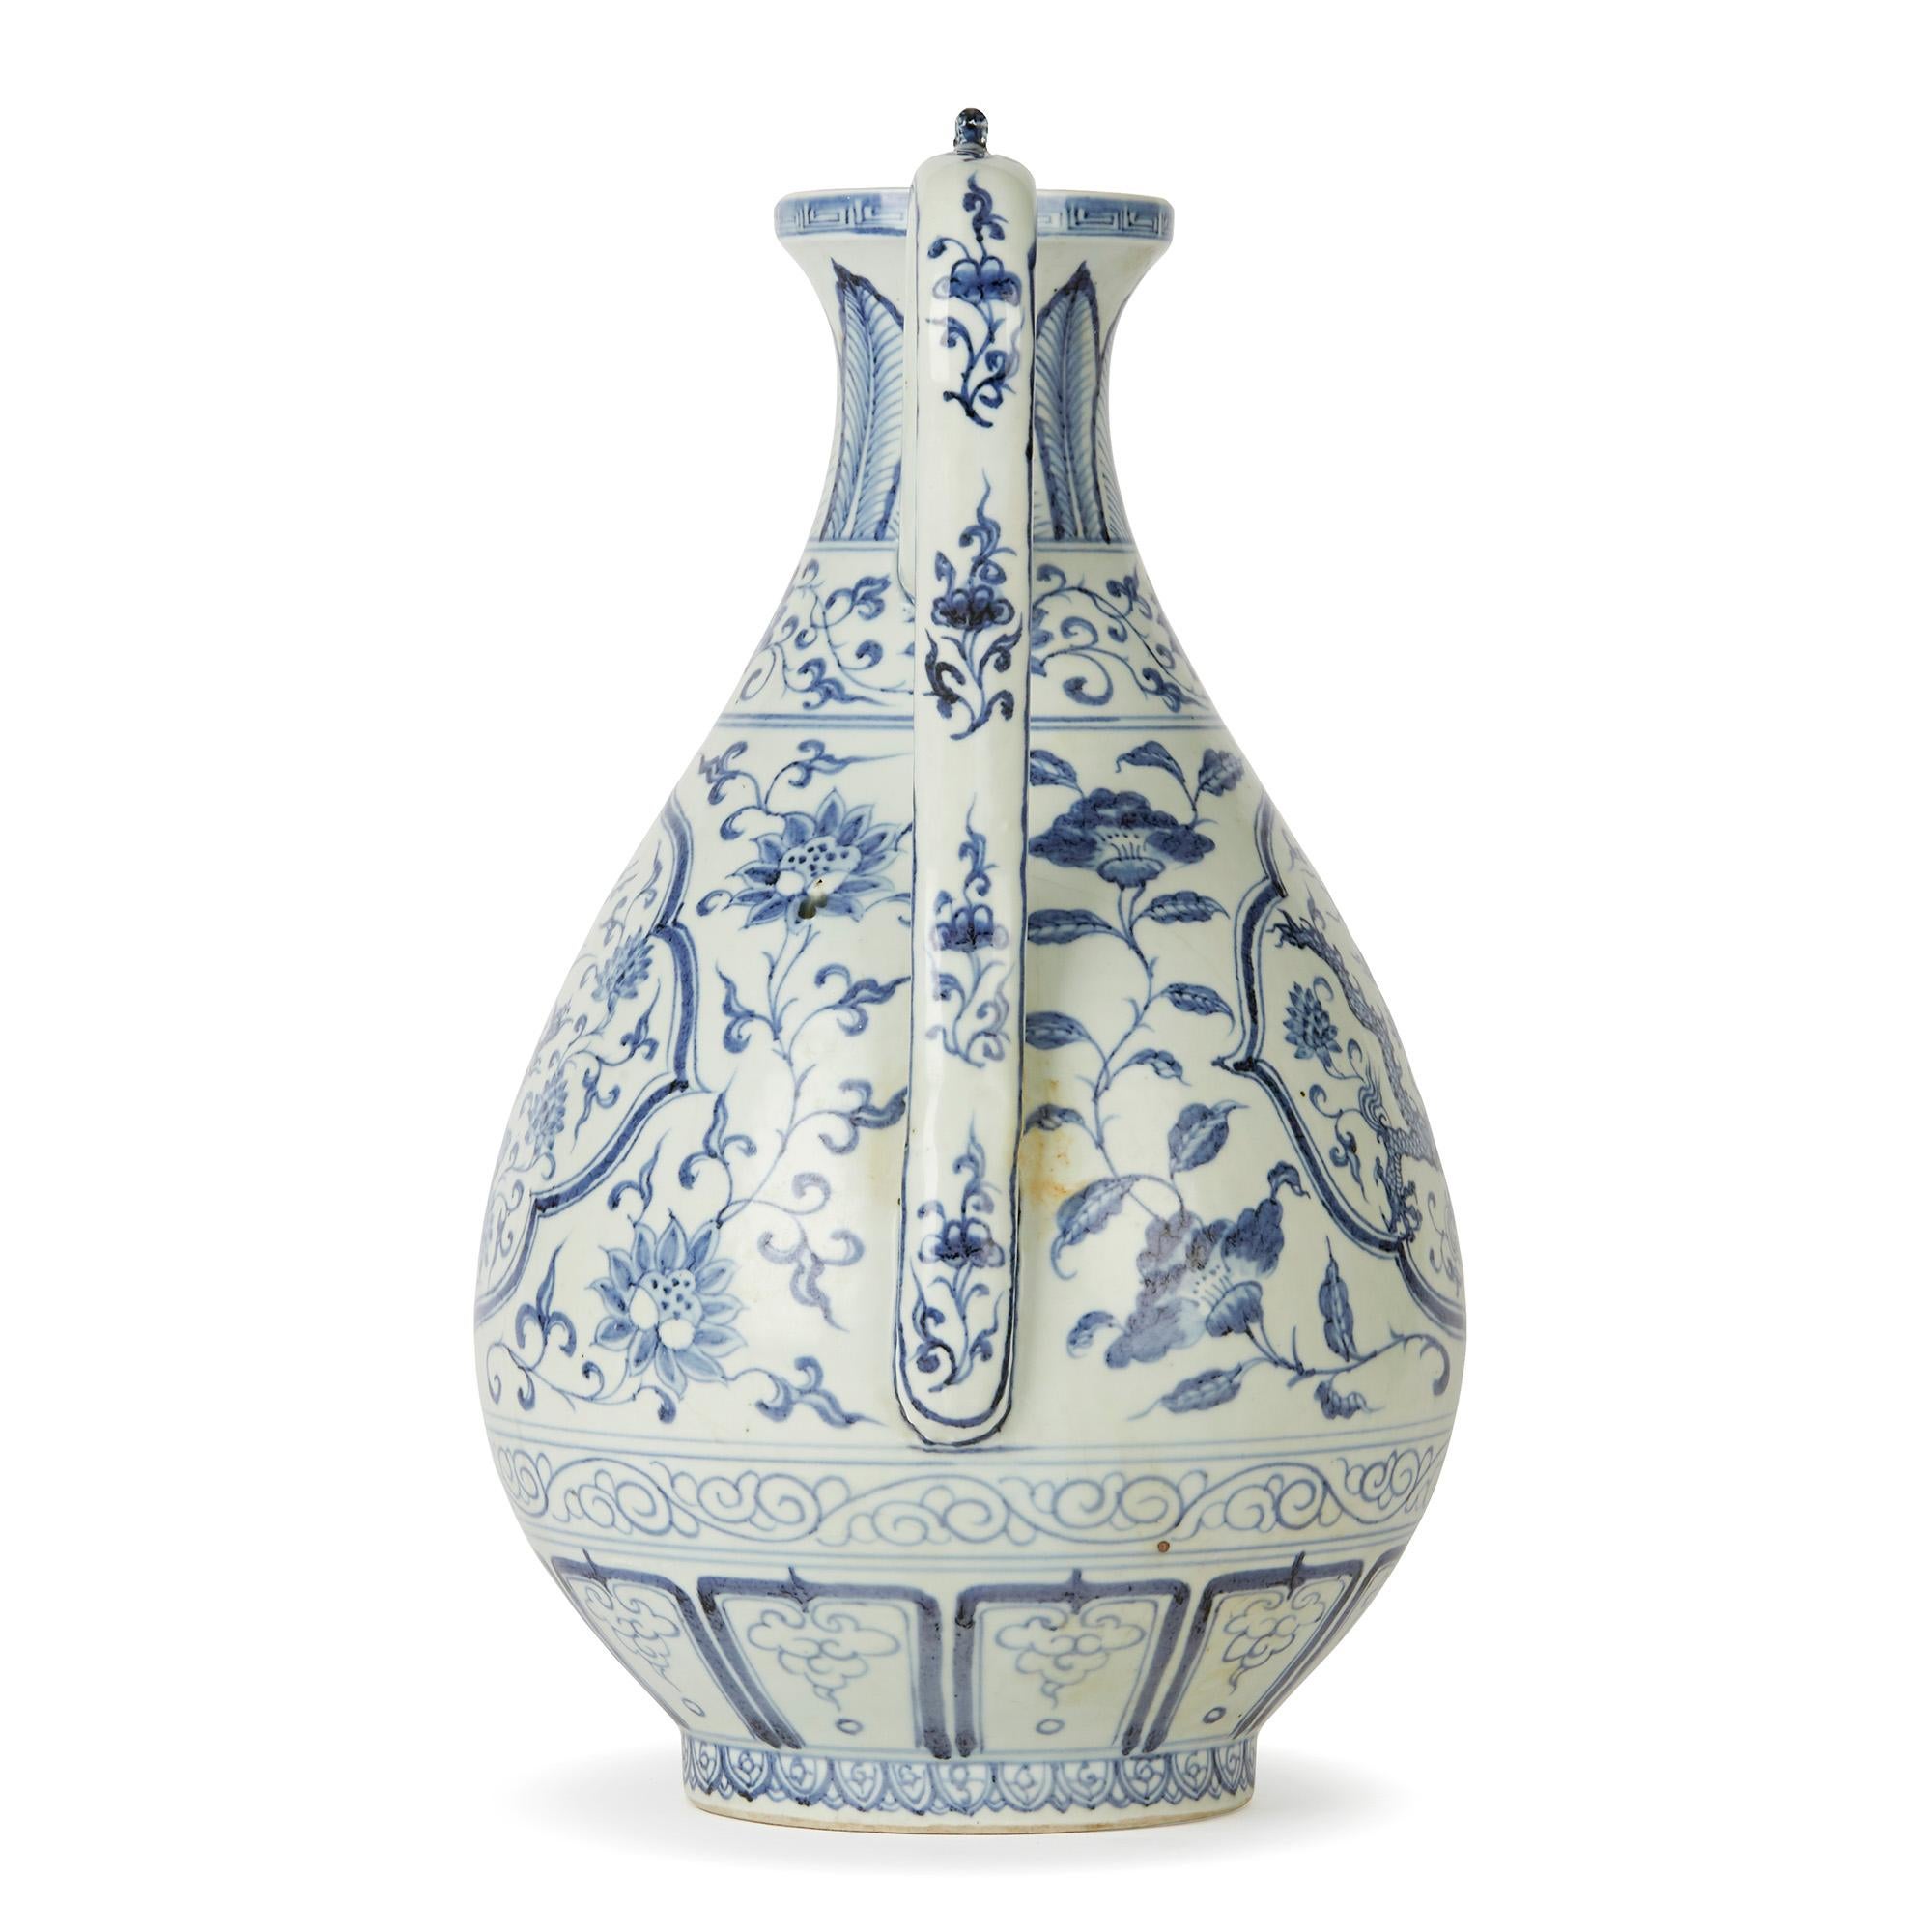 A large and impressive vintage Chinese porcelain ewer decorated in underglaze blue with panels one containing a dragon and the other a phoenix bird. The ewer has a pear shaped body with an everted rim with the long spout connected to the body by a